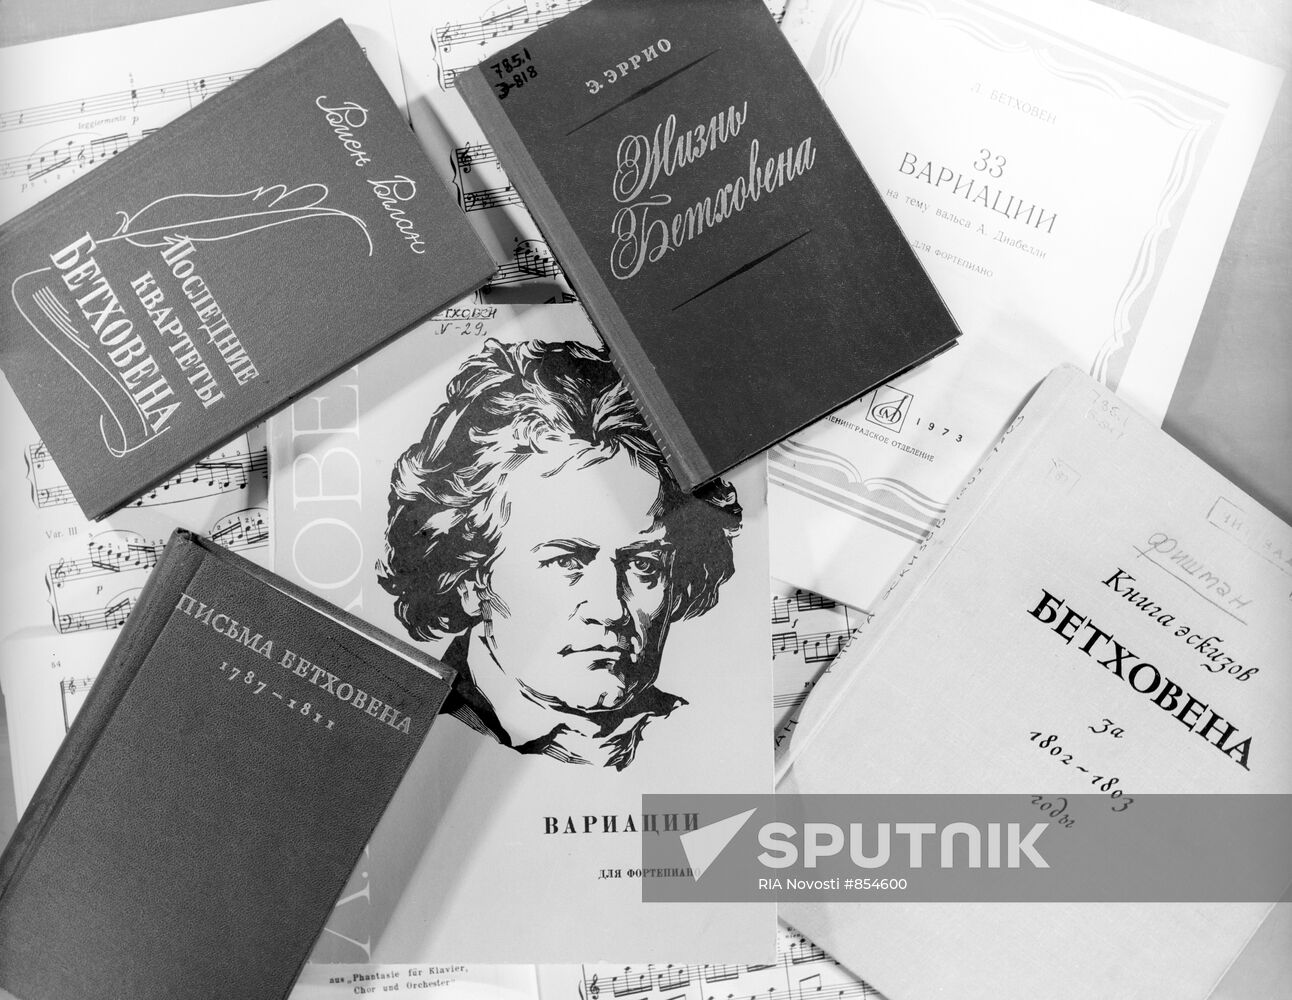 Works by Ludwig van Beethoven and books about composer